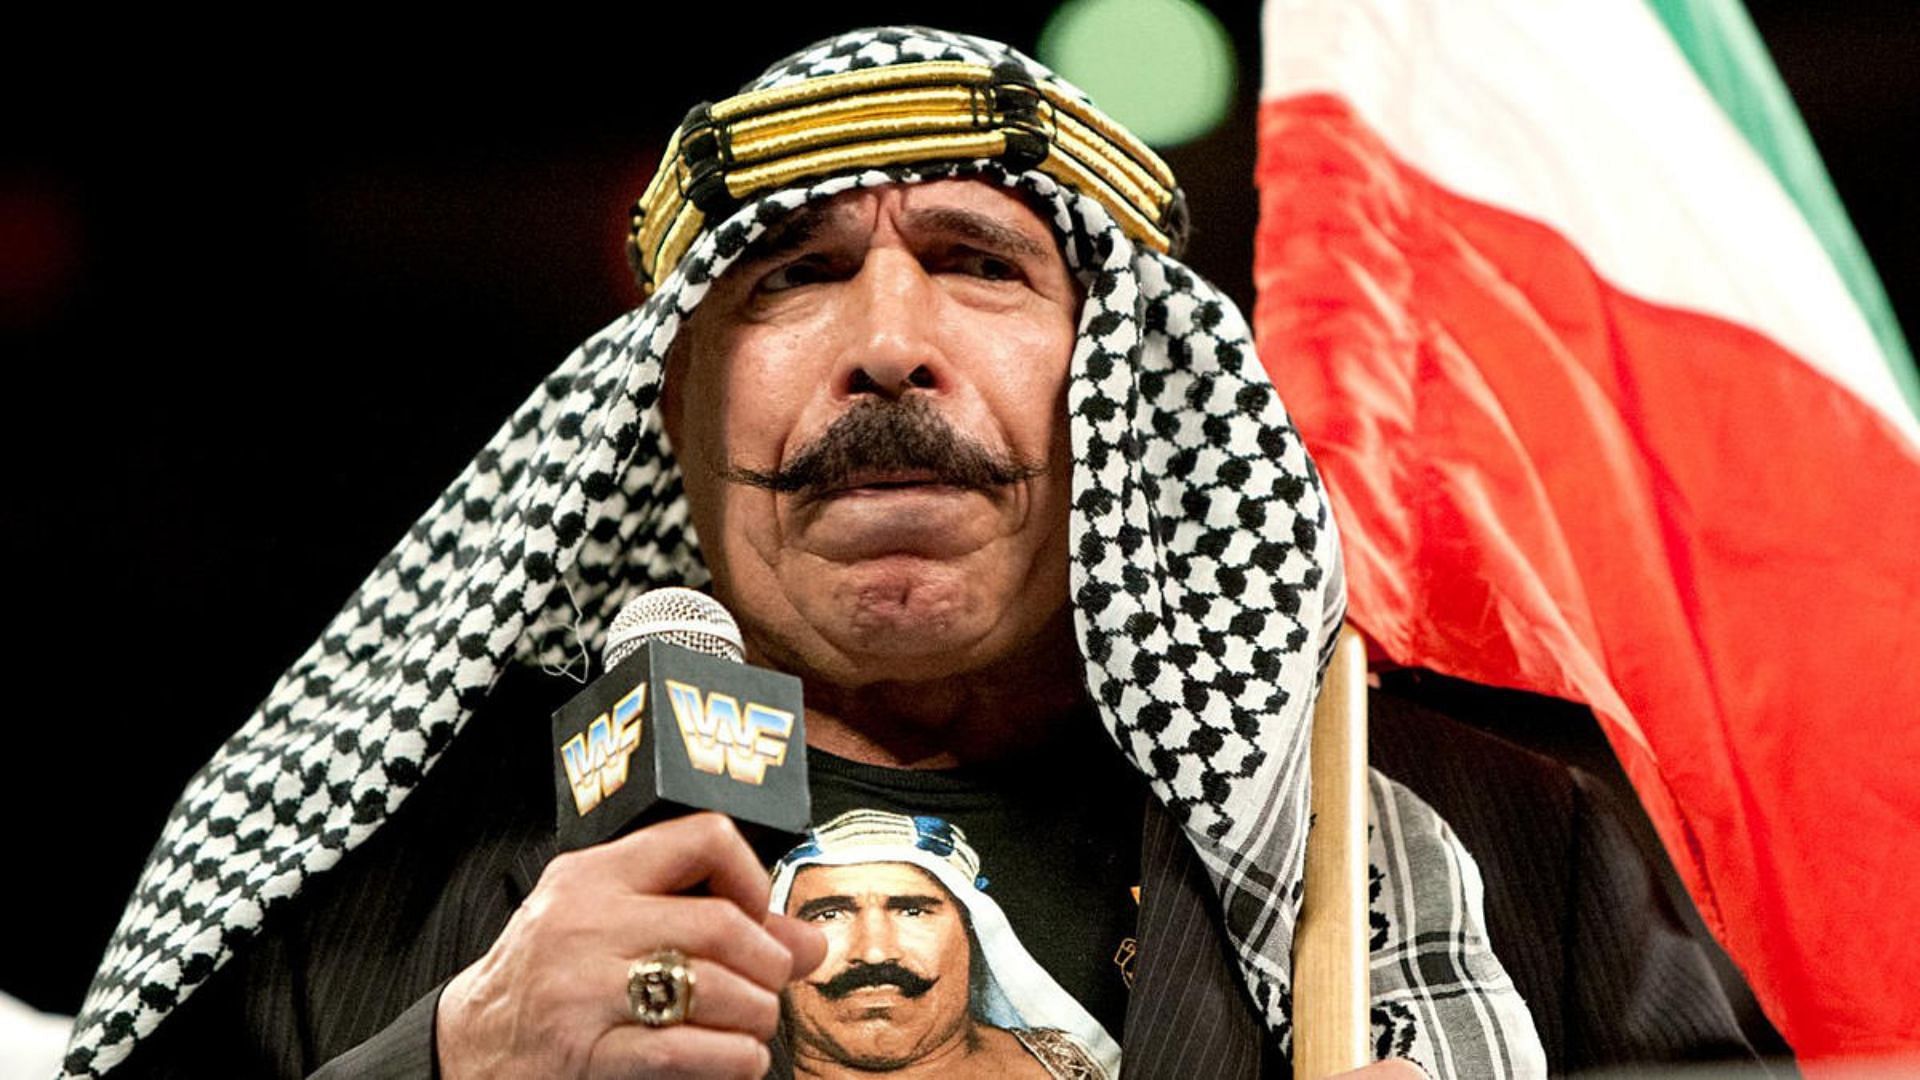 The Iron Sheik made his WWE debut in 1979